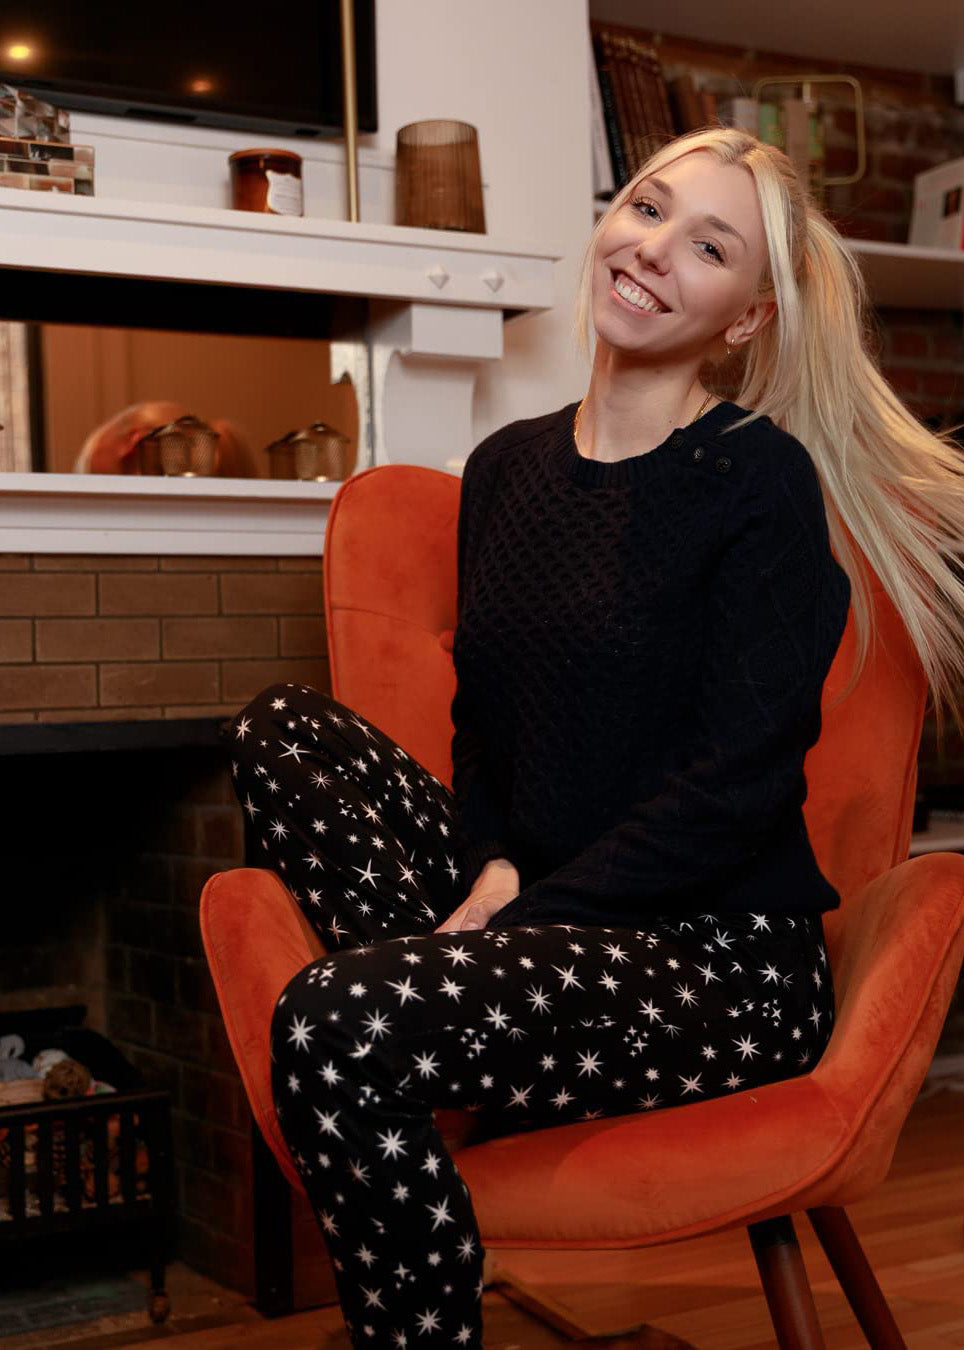 
                  
                    PJ joggers with soft velvety texture, stretch, elastic waistband, drawstring, and stylish ankle cuff. This pattern is scattered stars, of varied size and shape, white, on black stars on a black background. The model is happily sitting on a retro burn orange chair.
                  
                